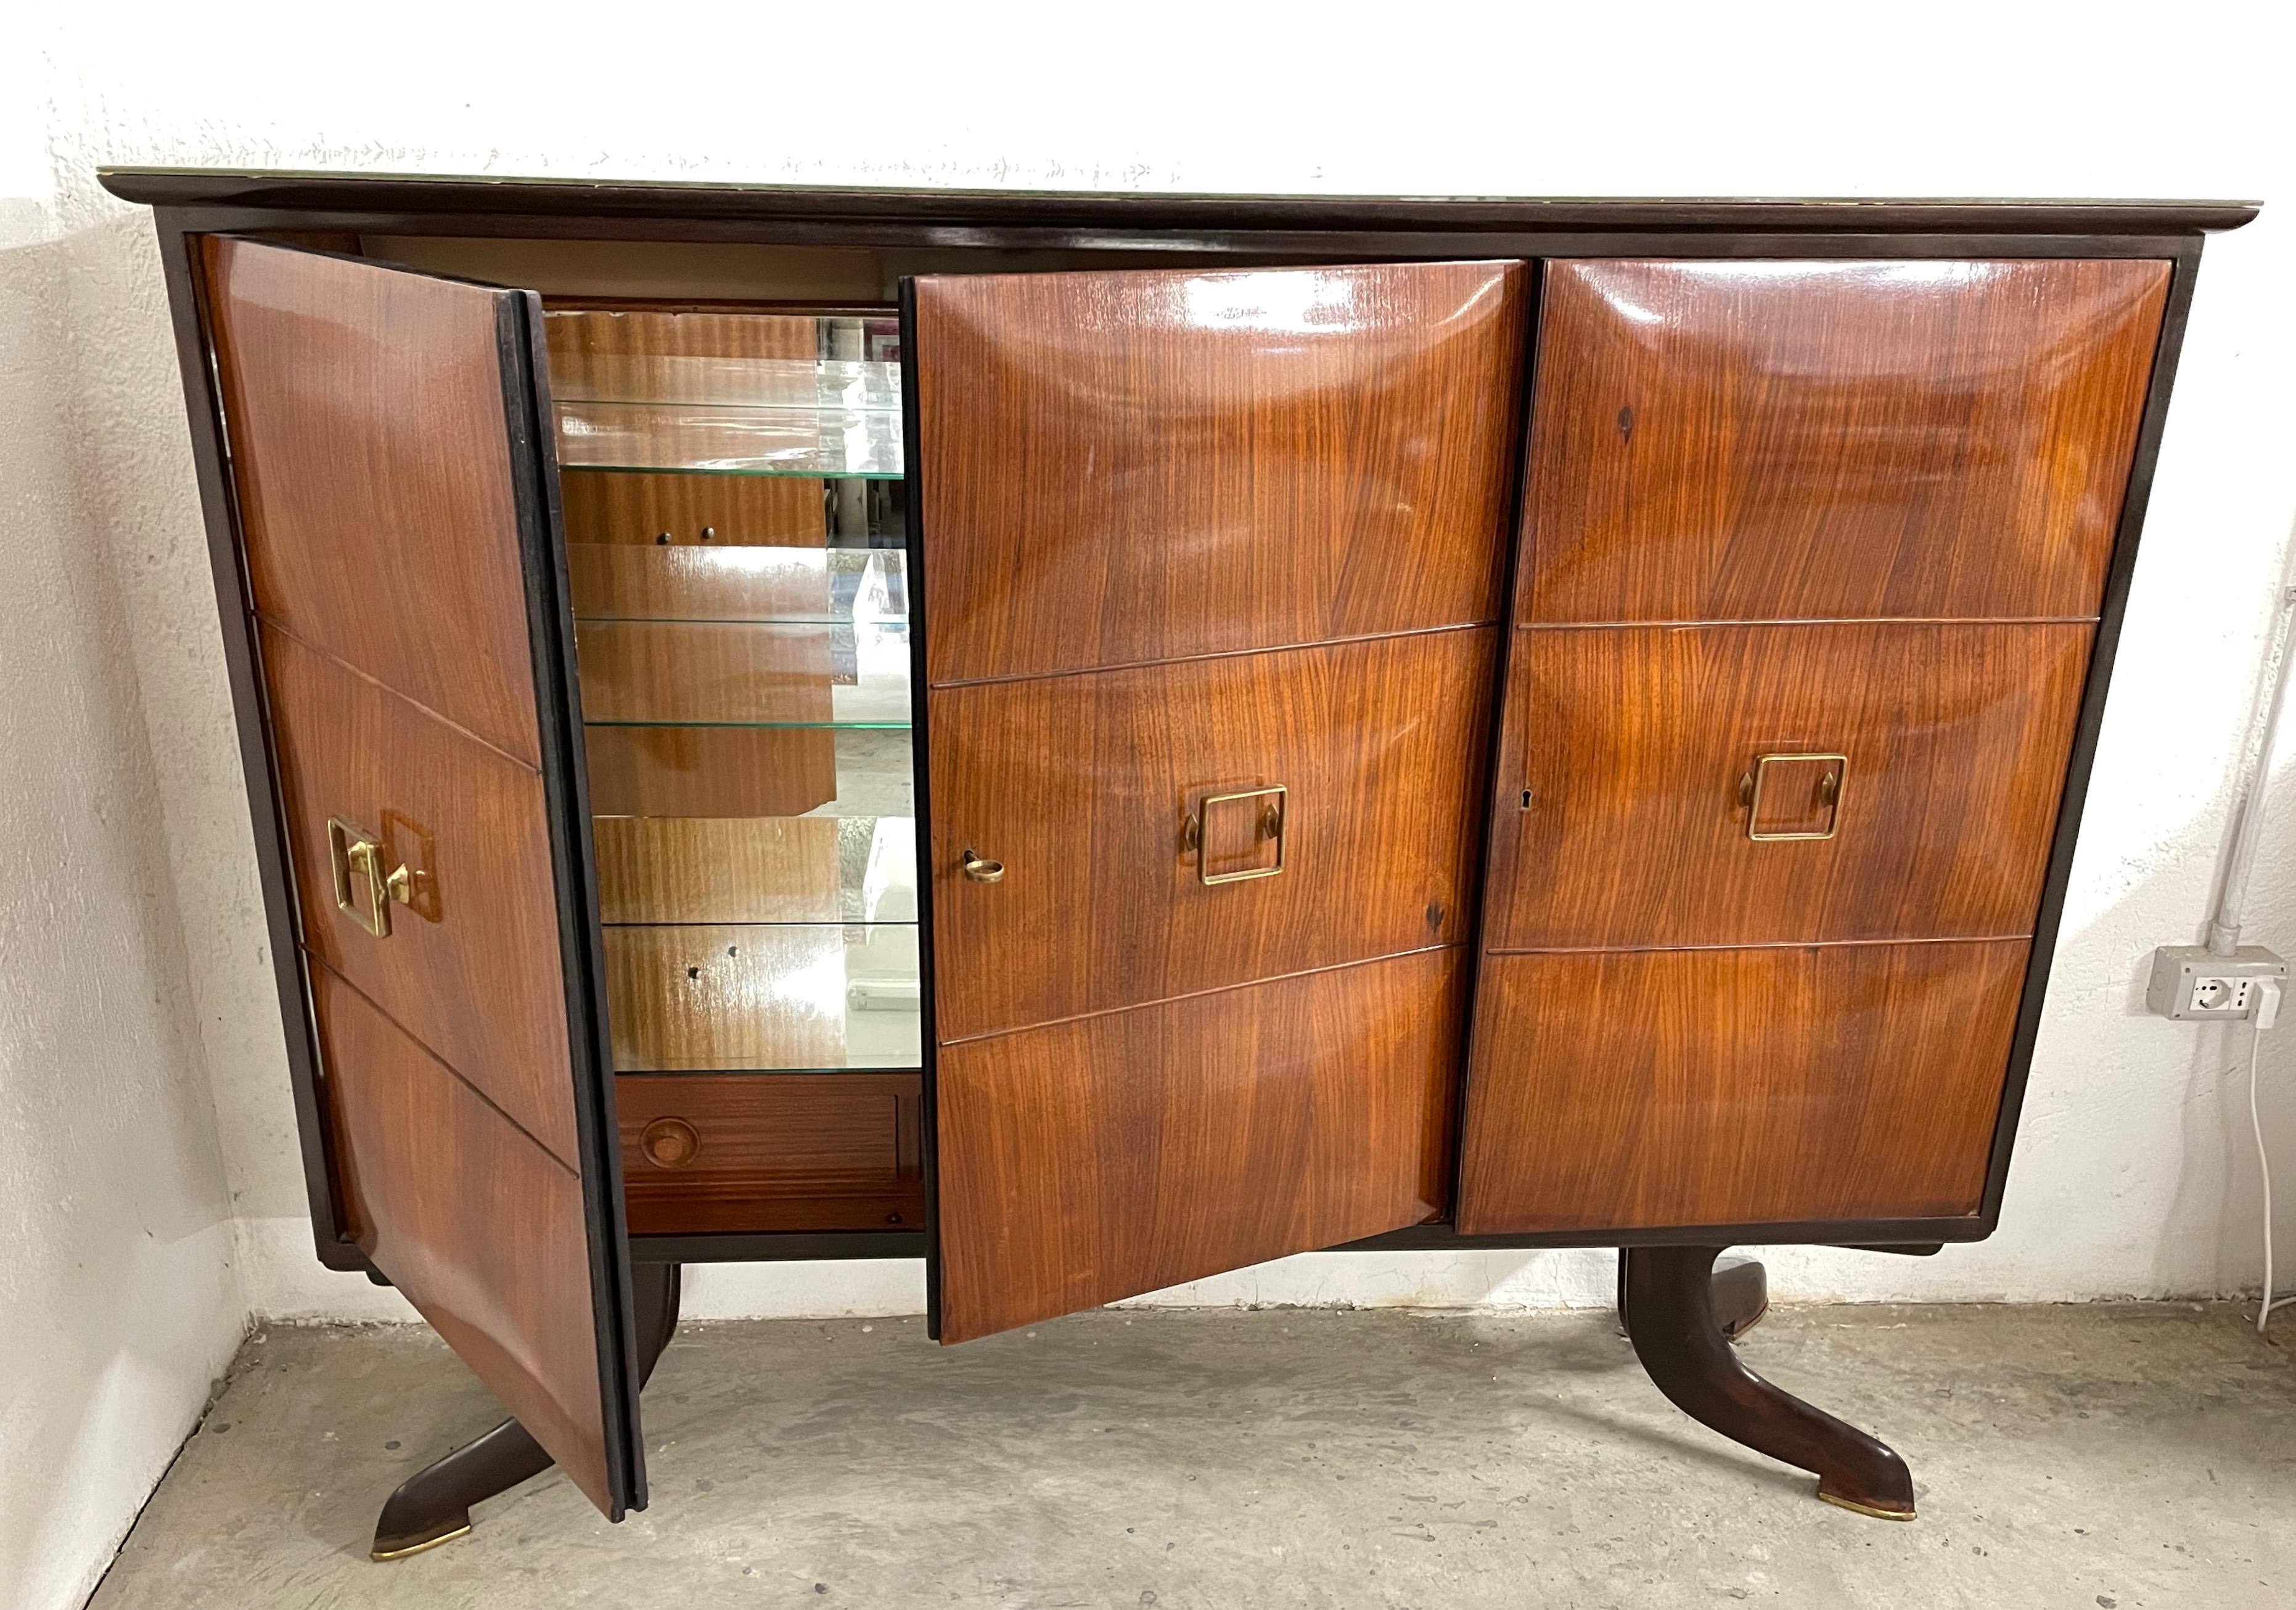 Exceptional dry bar cabinet with mirrors from the mid-century Paolo Buffa. This storage cabinet was produced in Italy during the 1950s

The front body has three solid veneered wood doors with rounded legs panels. The cabinet is veneered on all